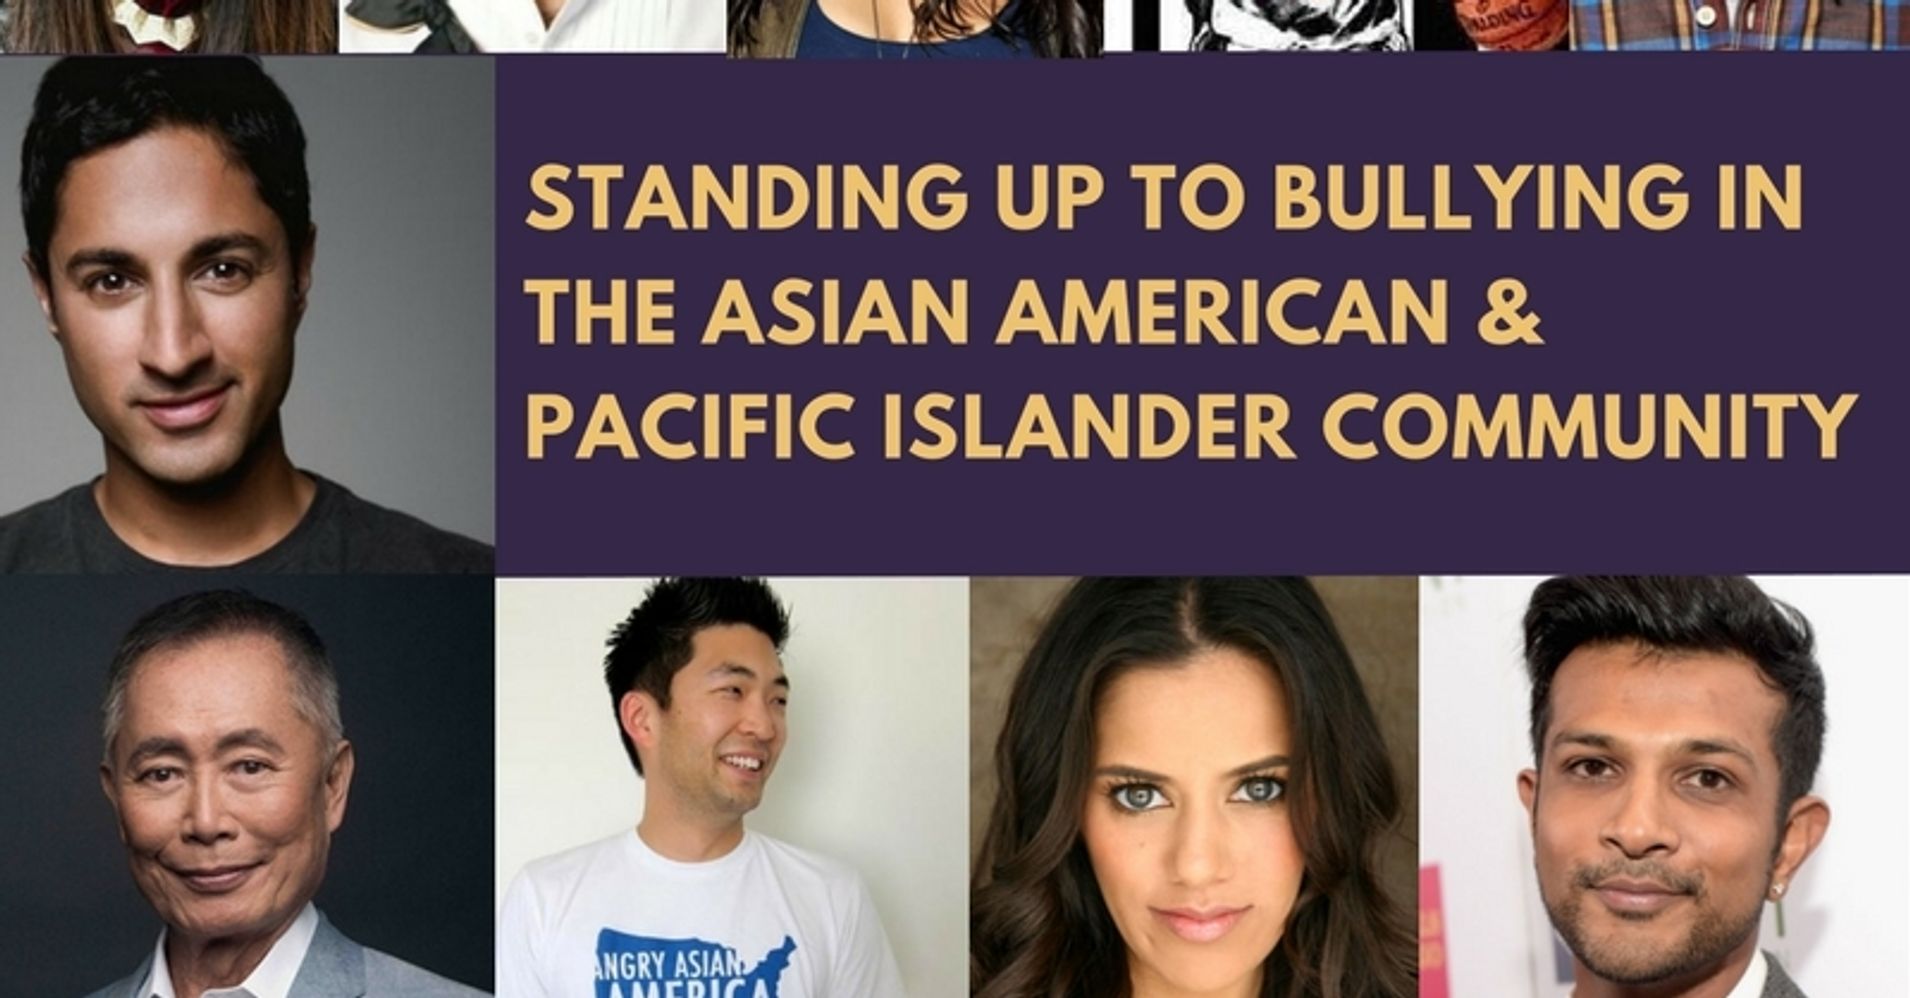 We Need To Stand Up To Bullying In The Asian American And Pacific